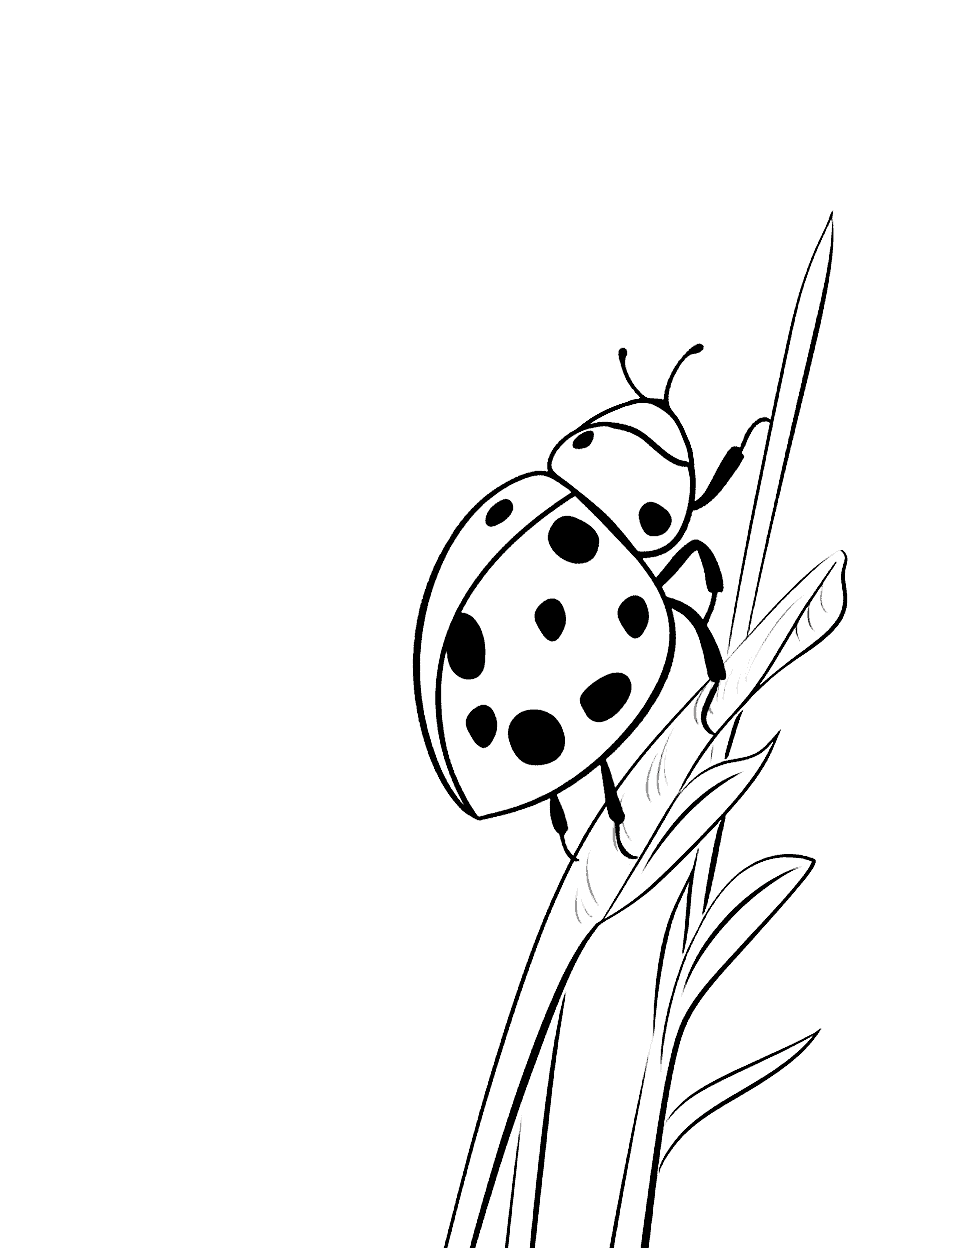 Ladybug Climbing a Blade of Grass Coloring Page - A small ladybug making its way up a tall blade of grass.